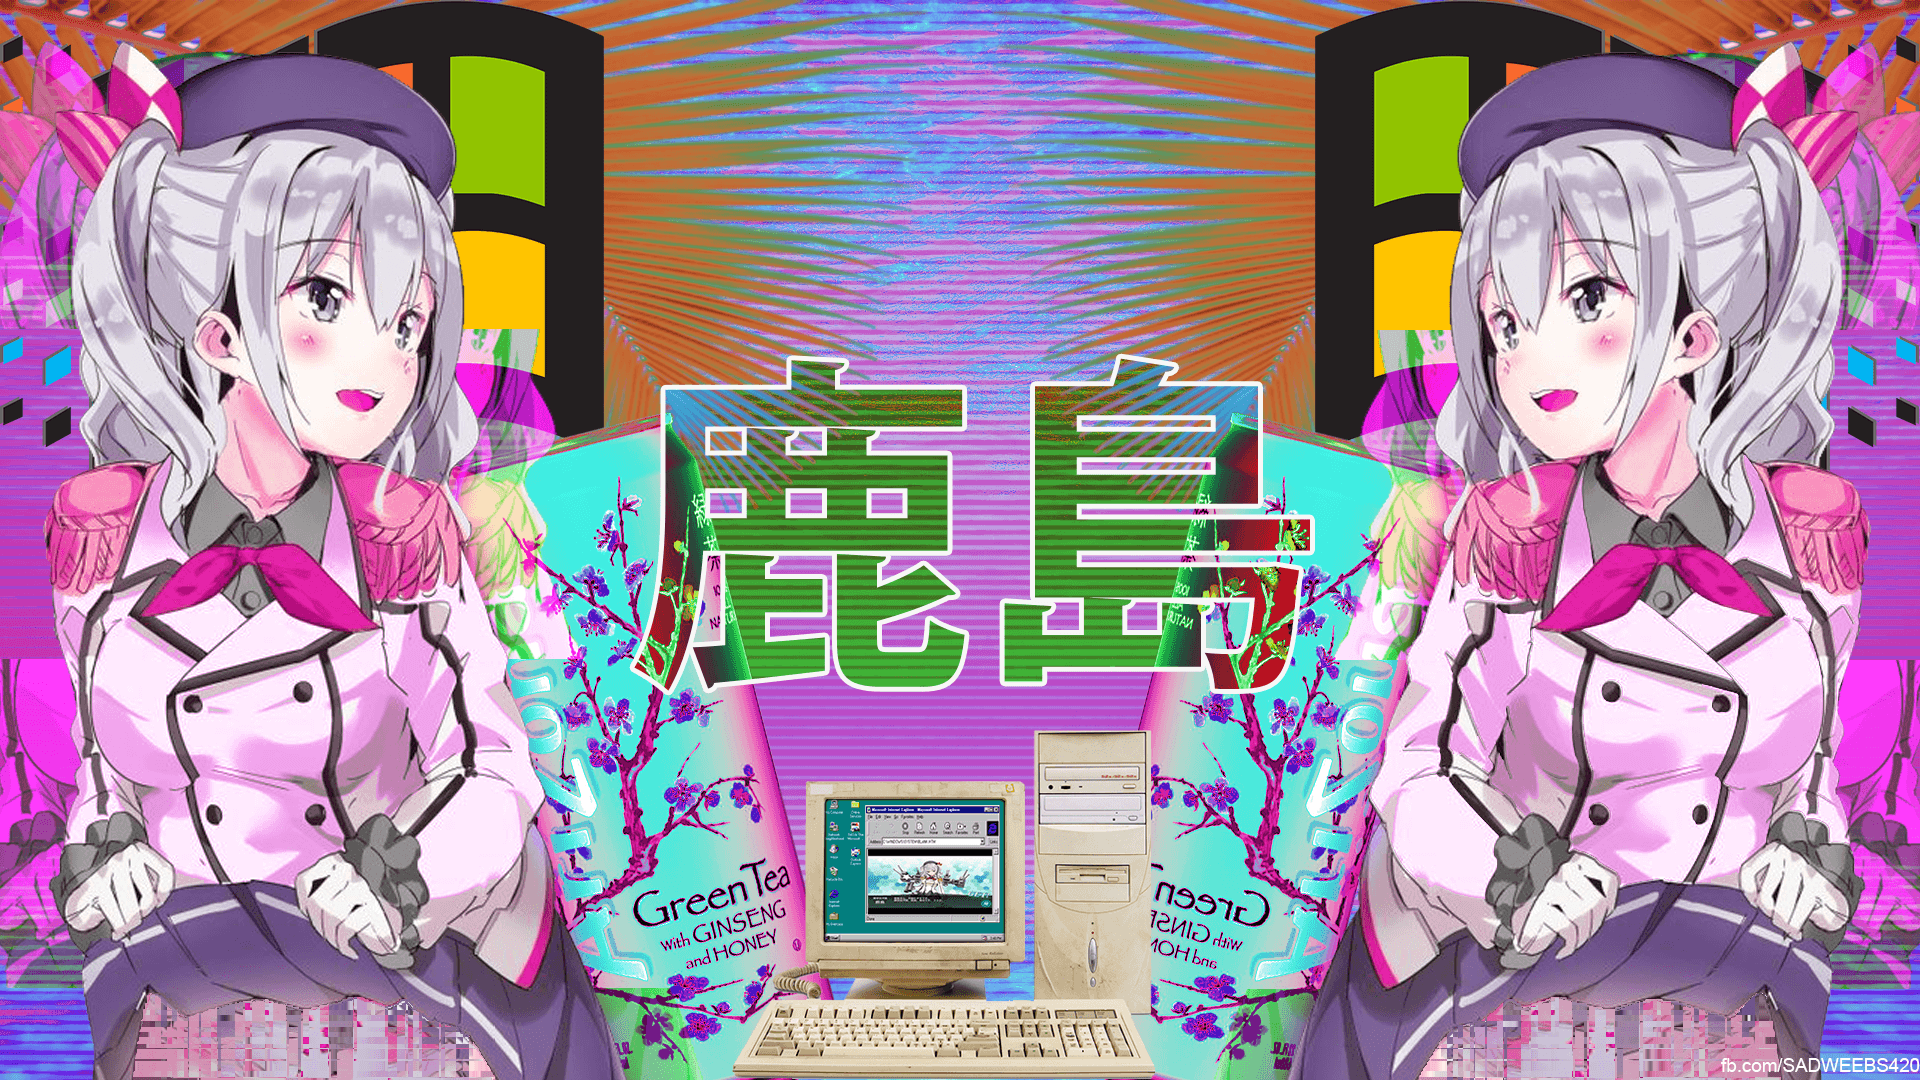 42+] Aesthetic Wallpapers Anime